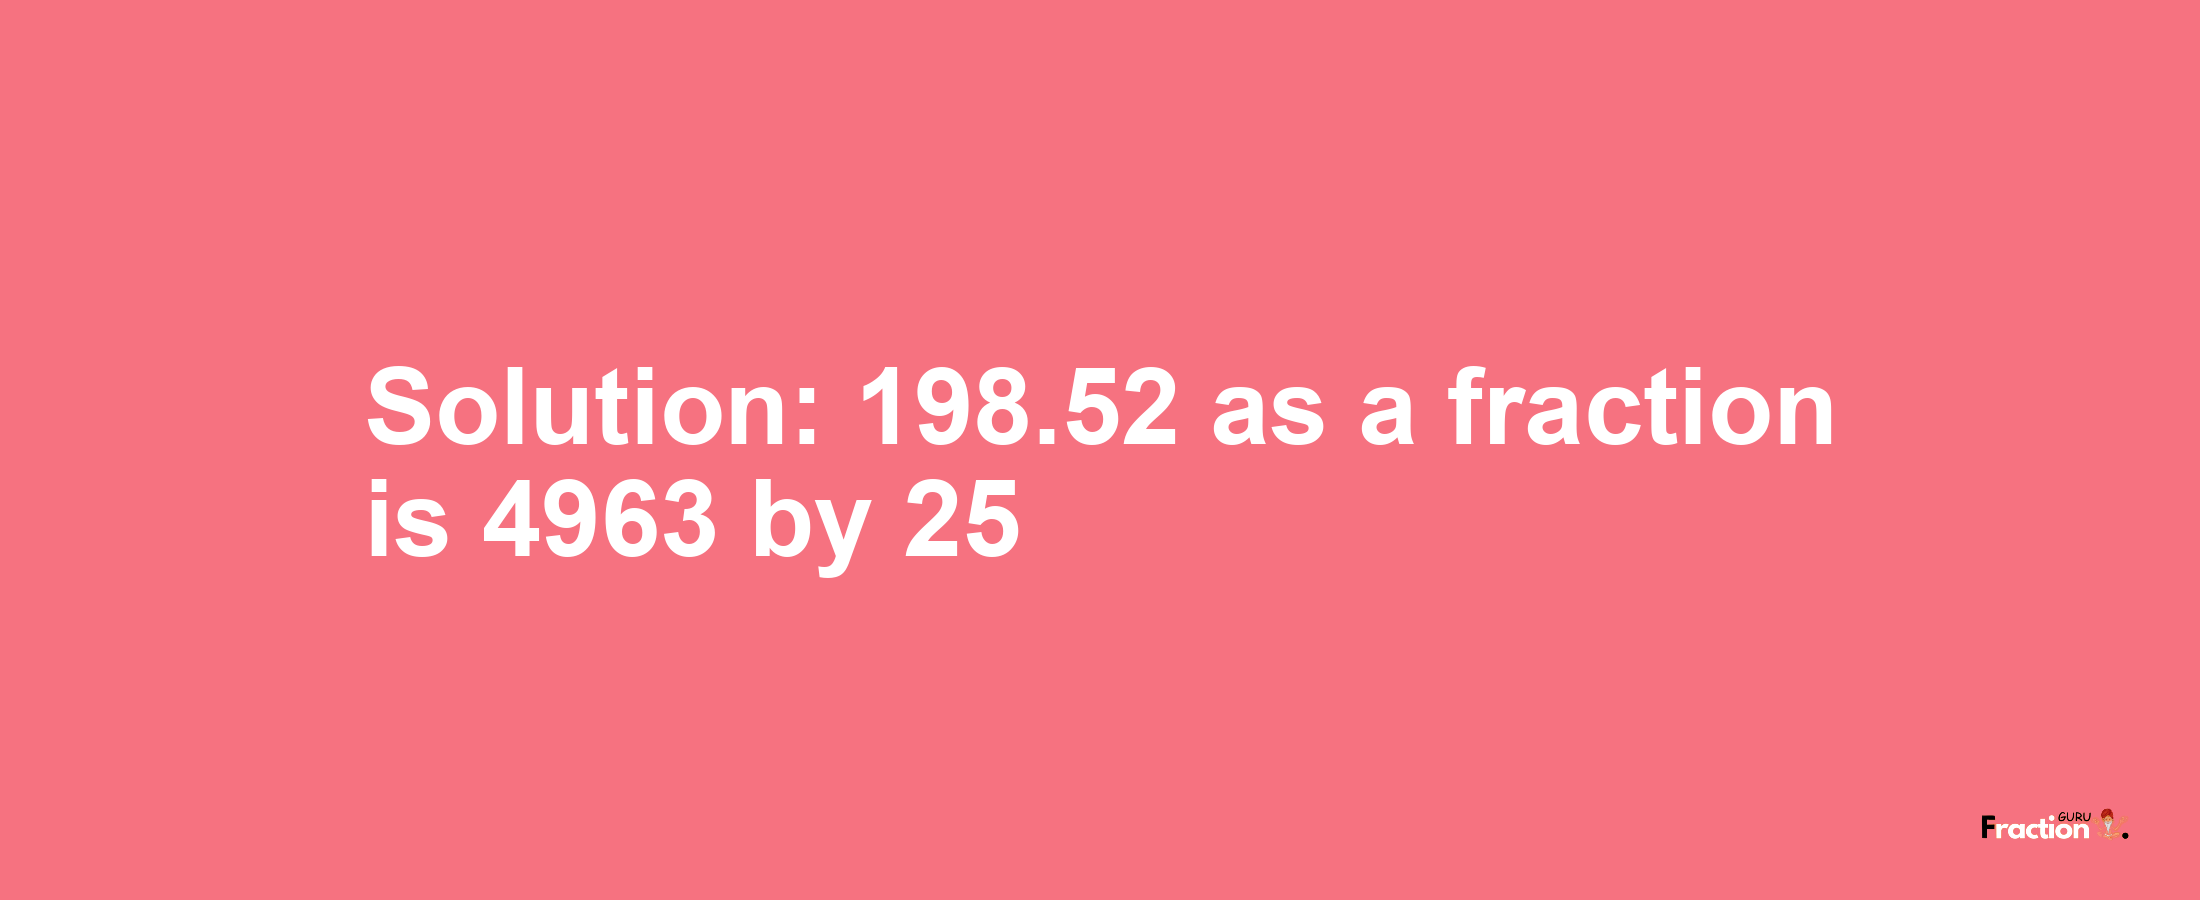 Solution:198.52 as a fraction is 4963/25